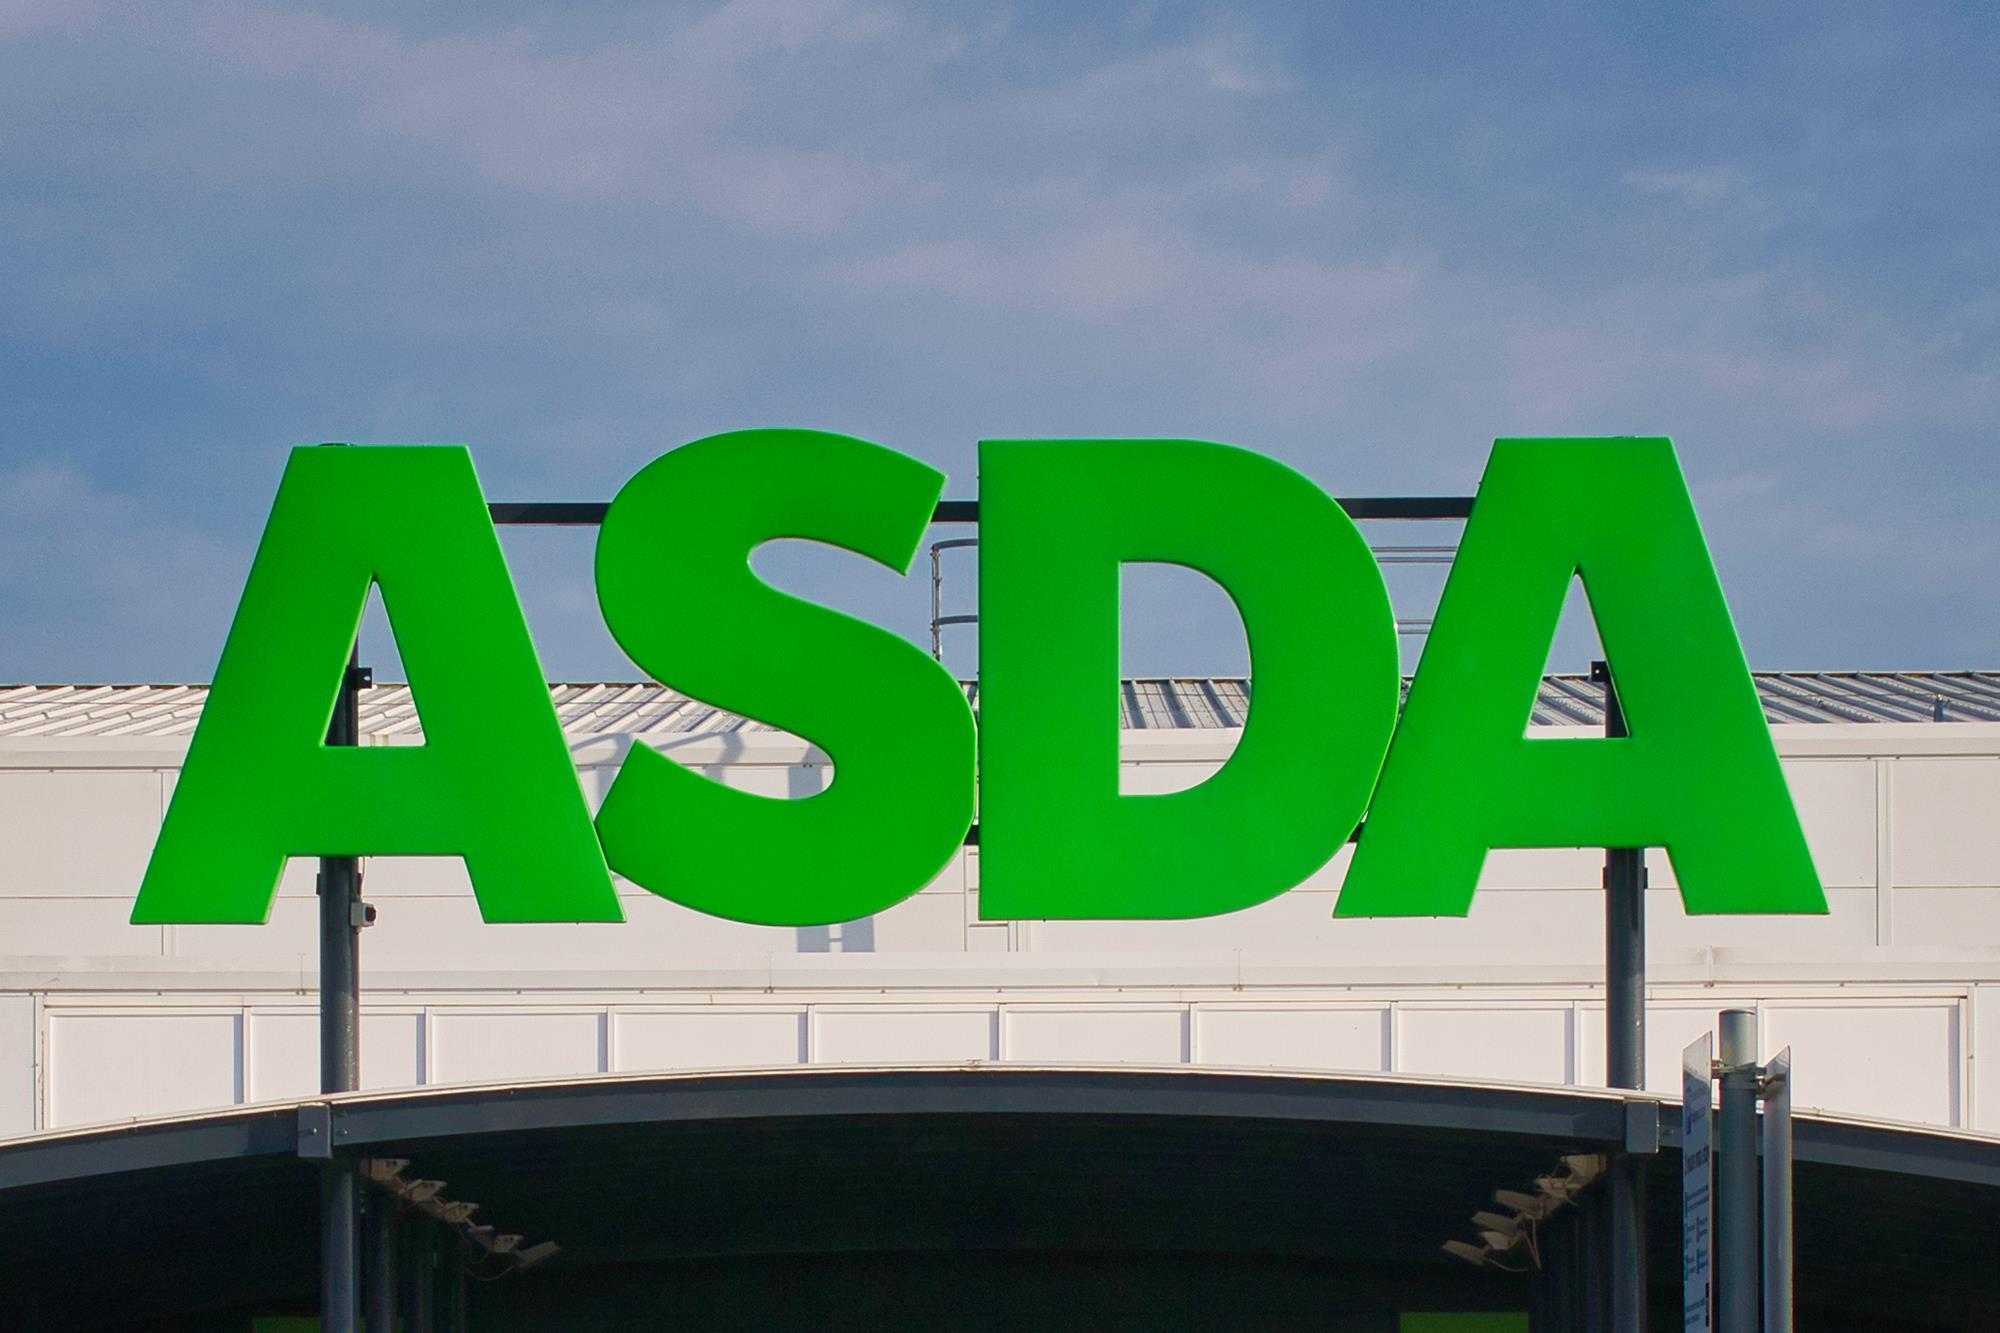 Asda says it is pulling away from biggest supermarkets despite discounting, Asda